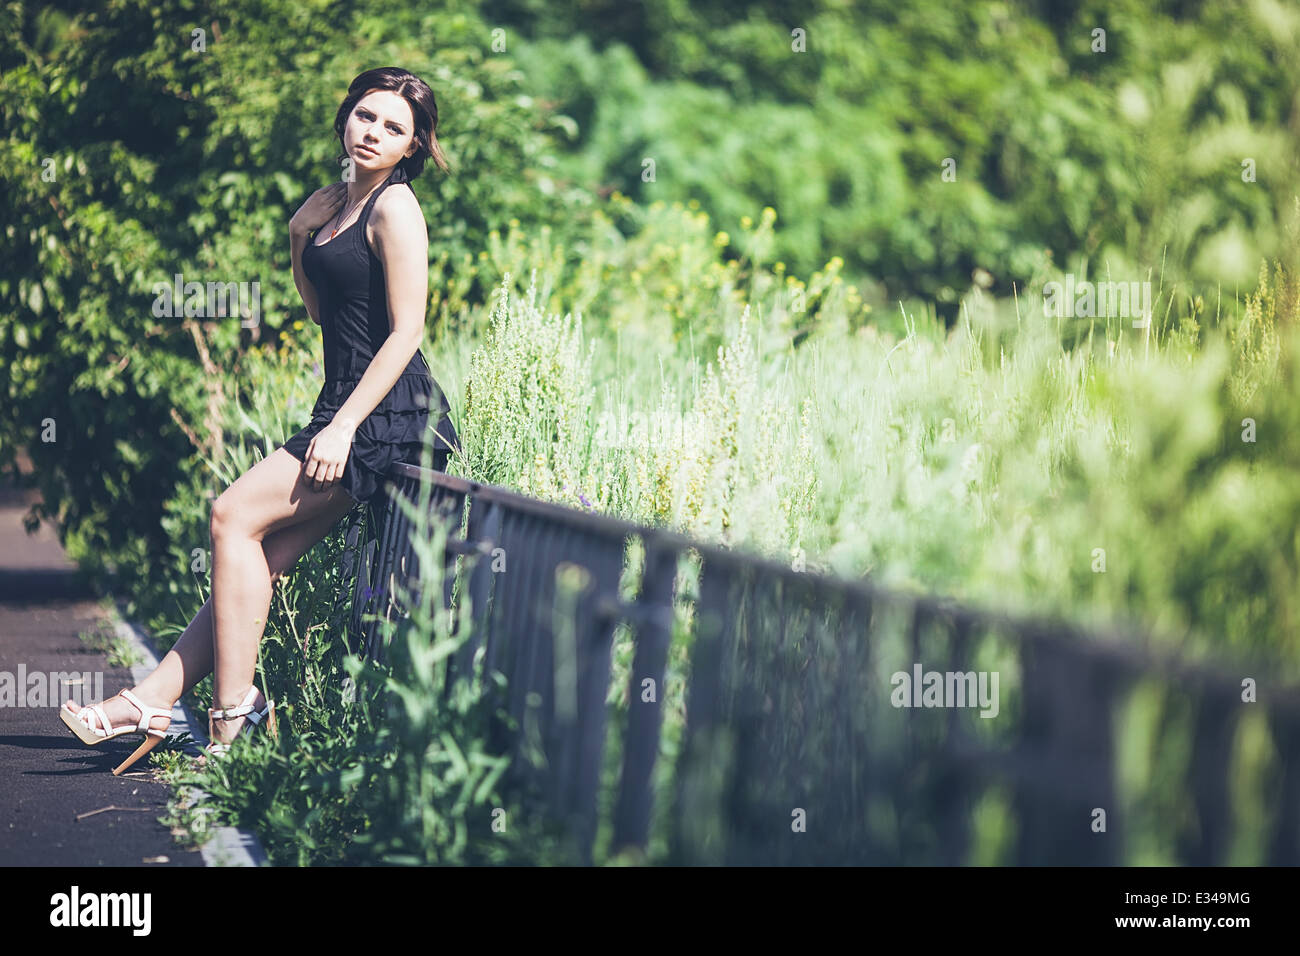 Girl in black dress on fence Stock Photo